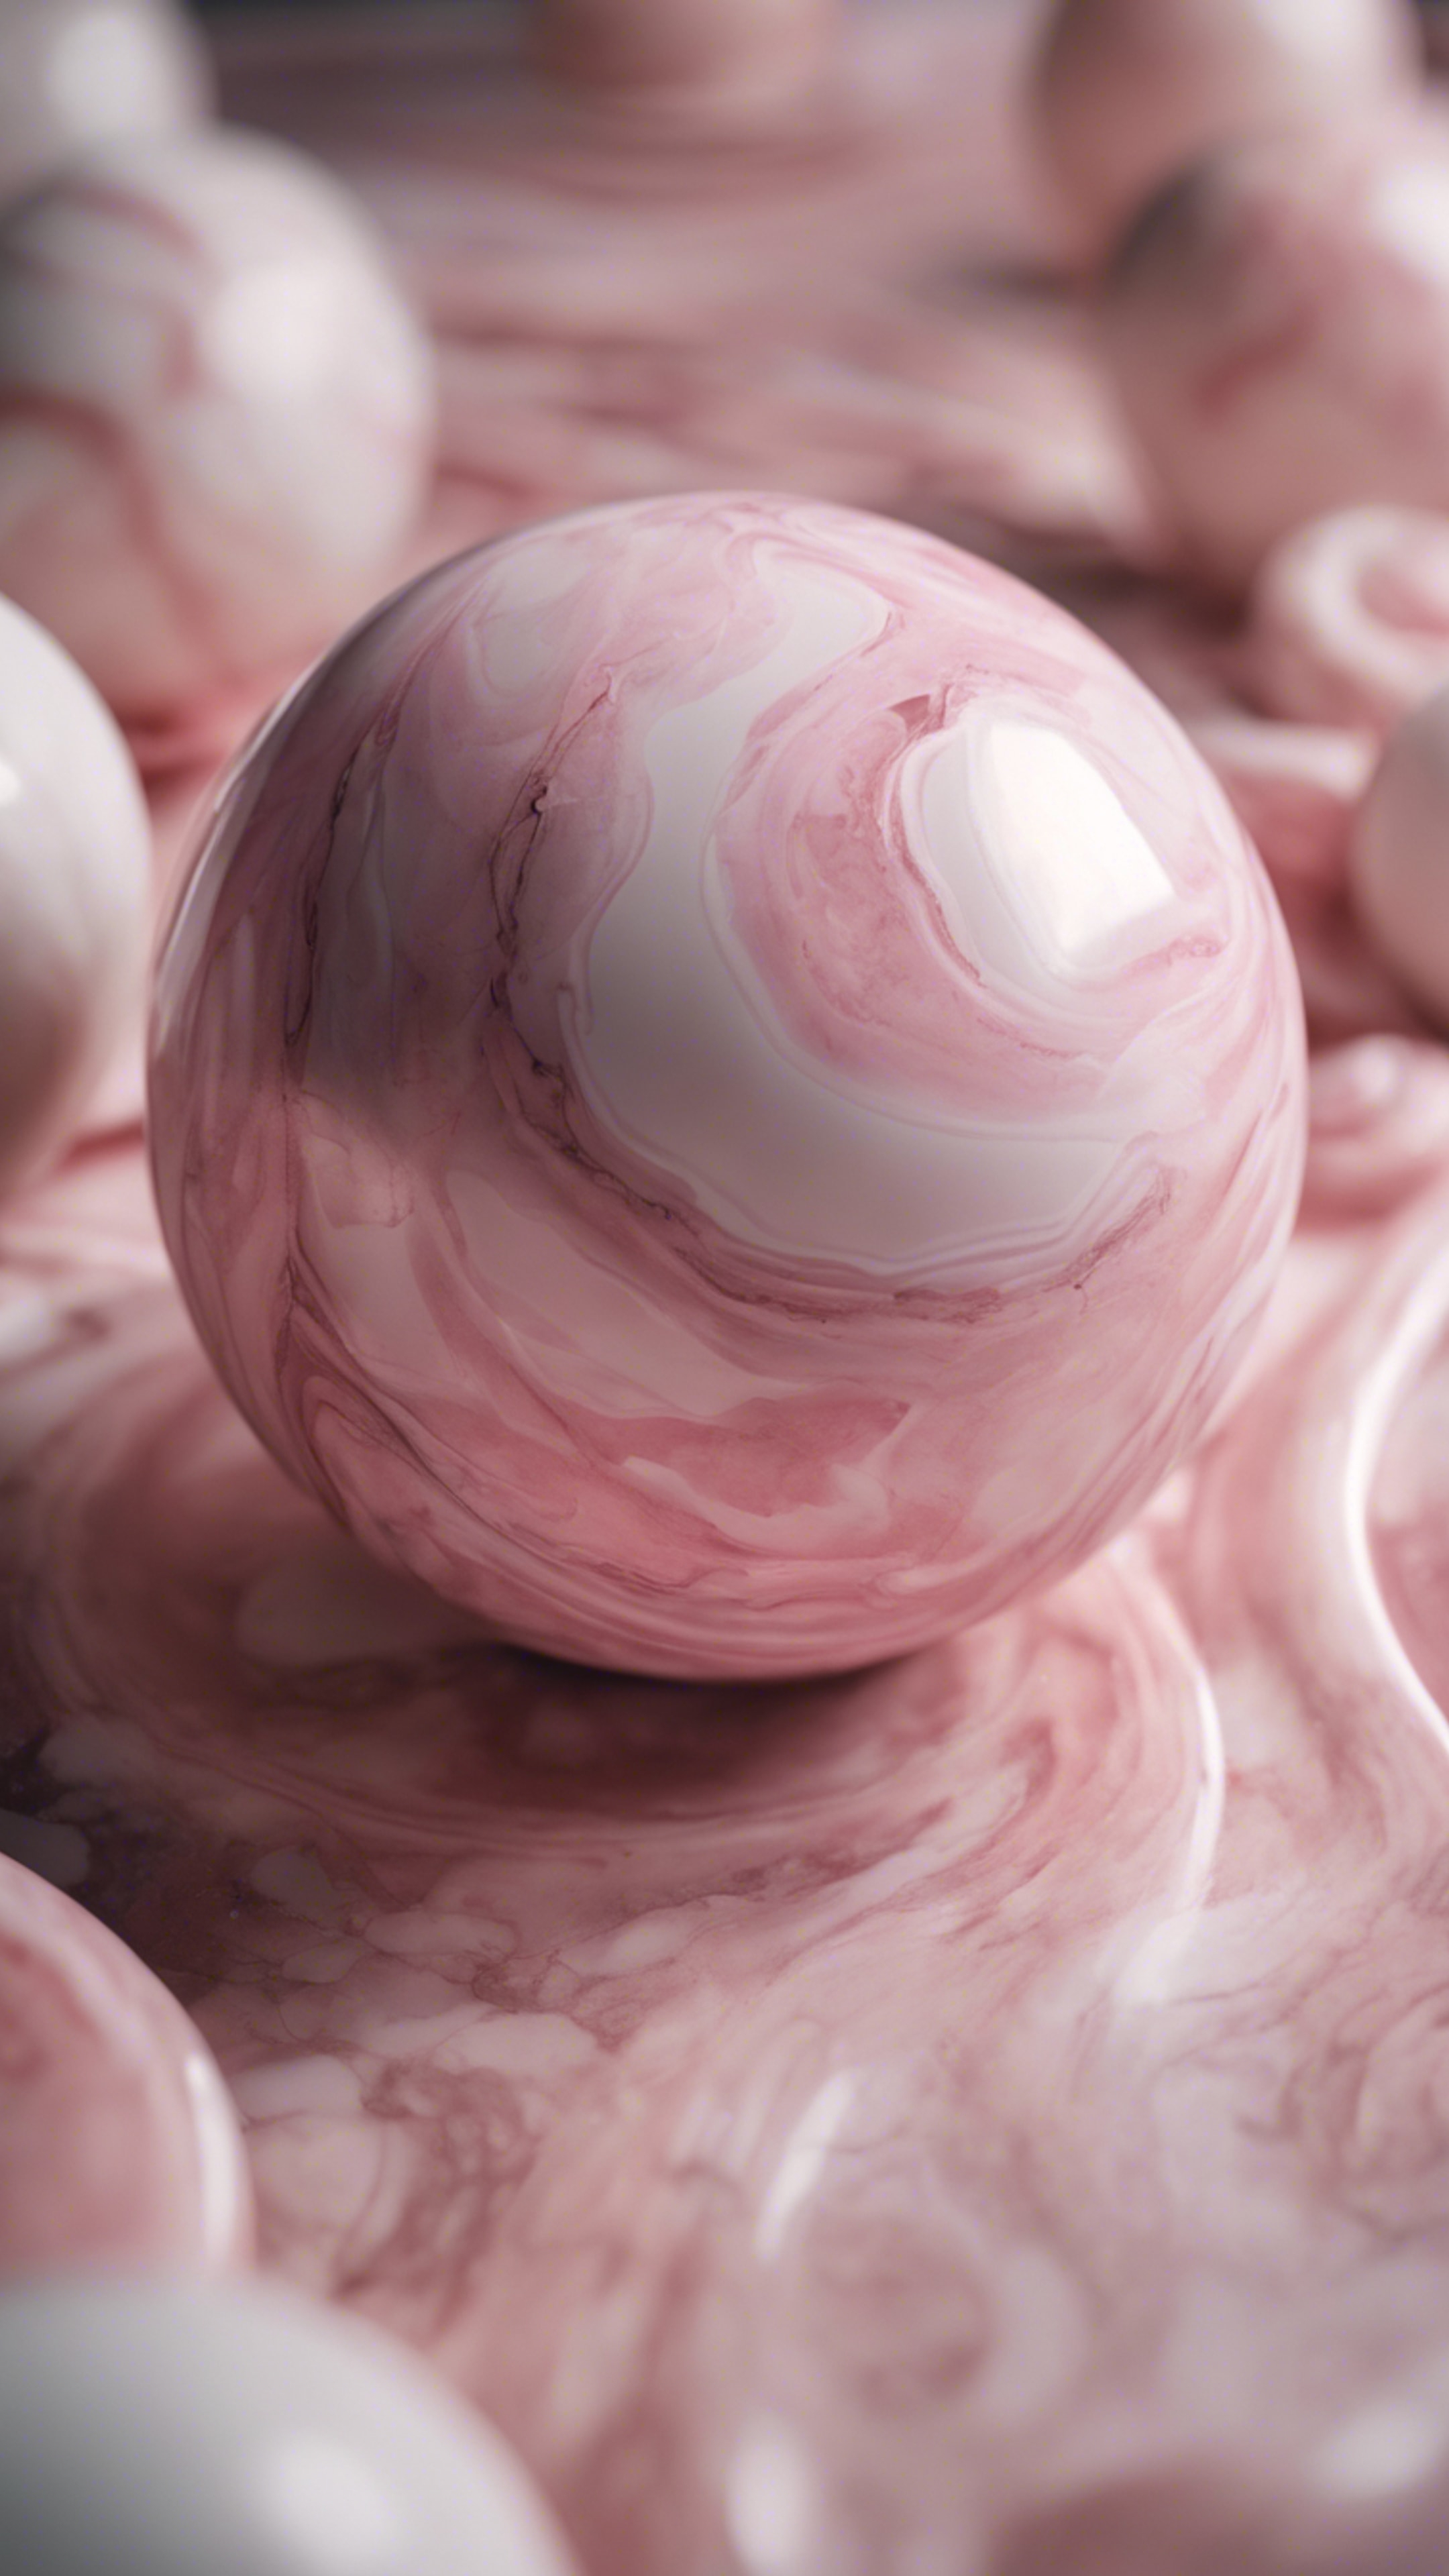 A ball made of swirls of soft pink and white marble. Валлпапер[0b47fd6a50864845acd3]